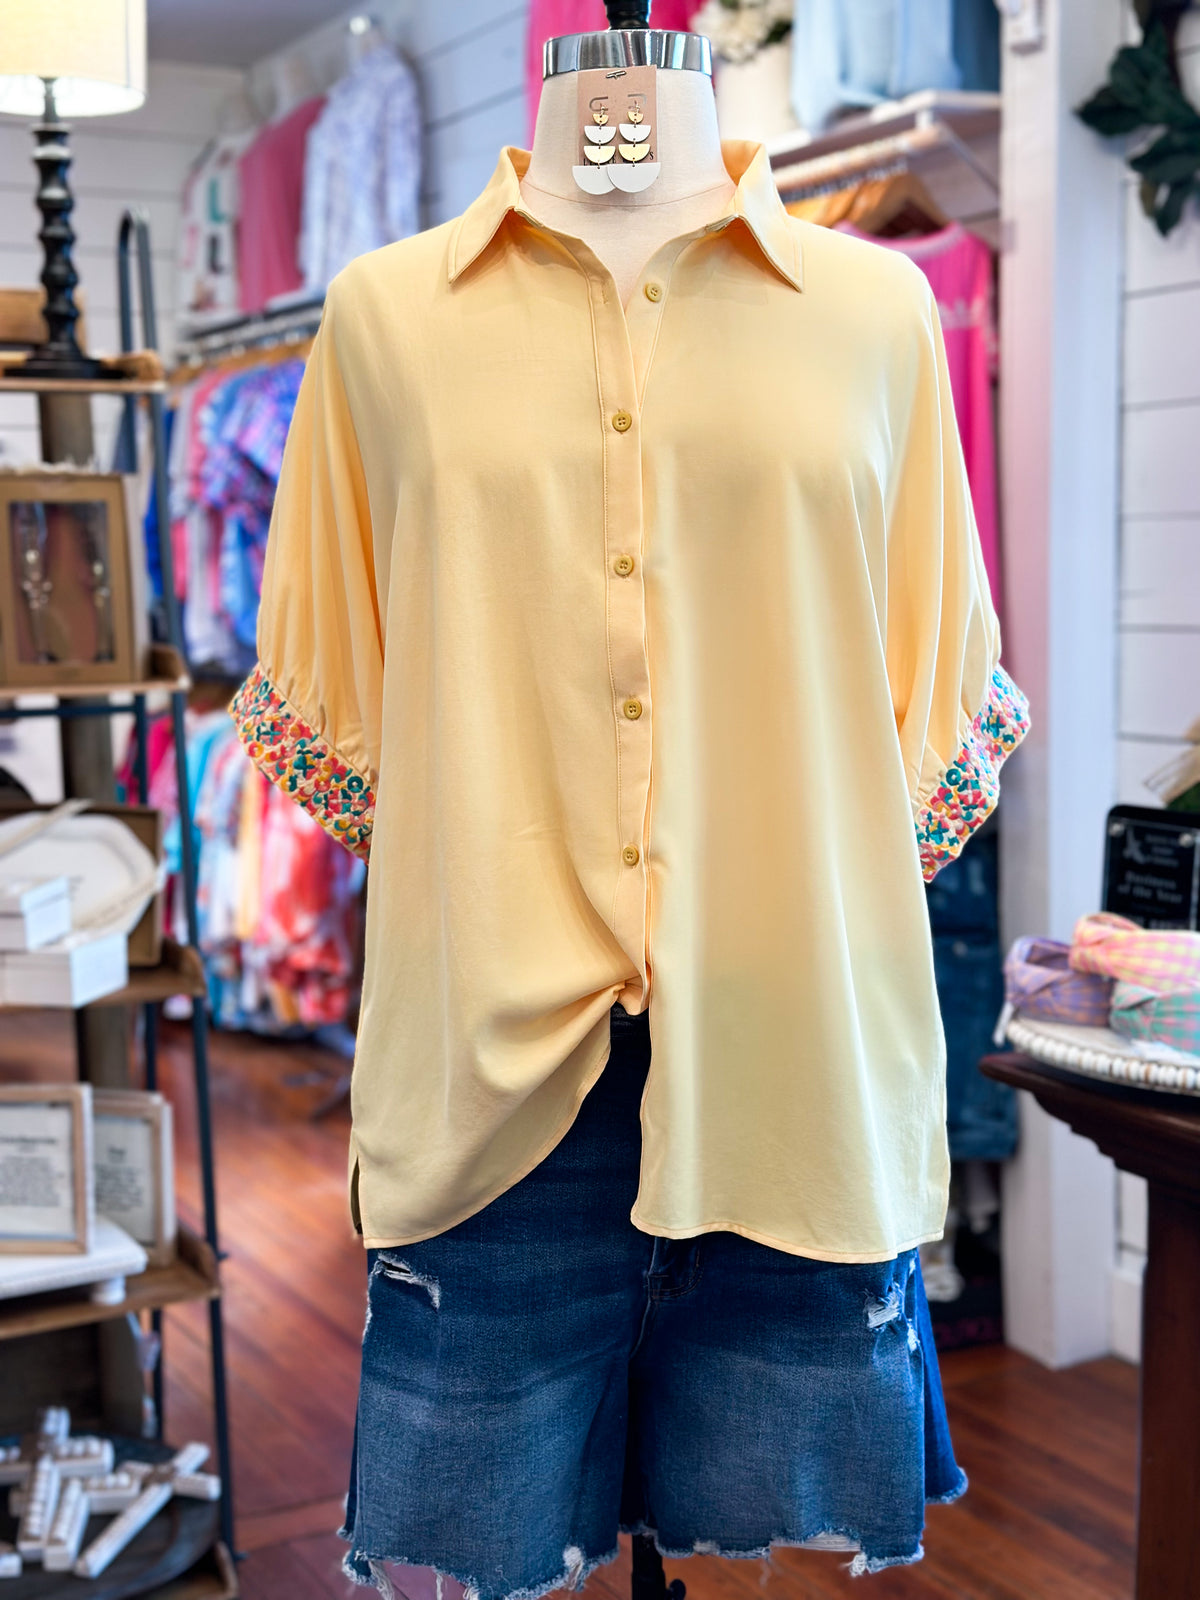 washco sunny top yellow button down